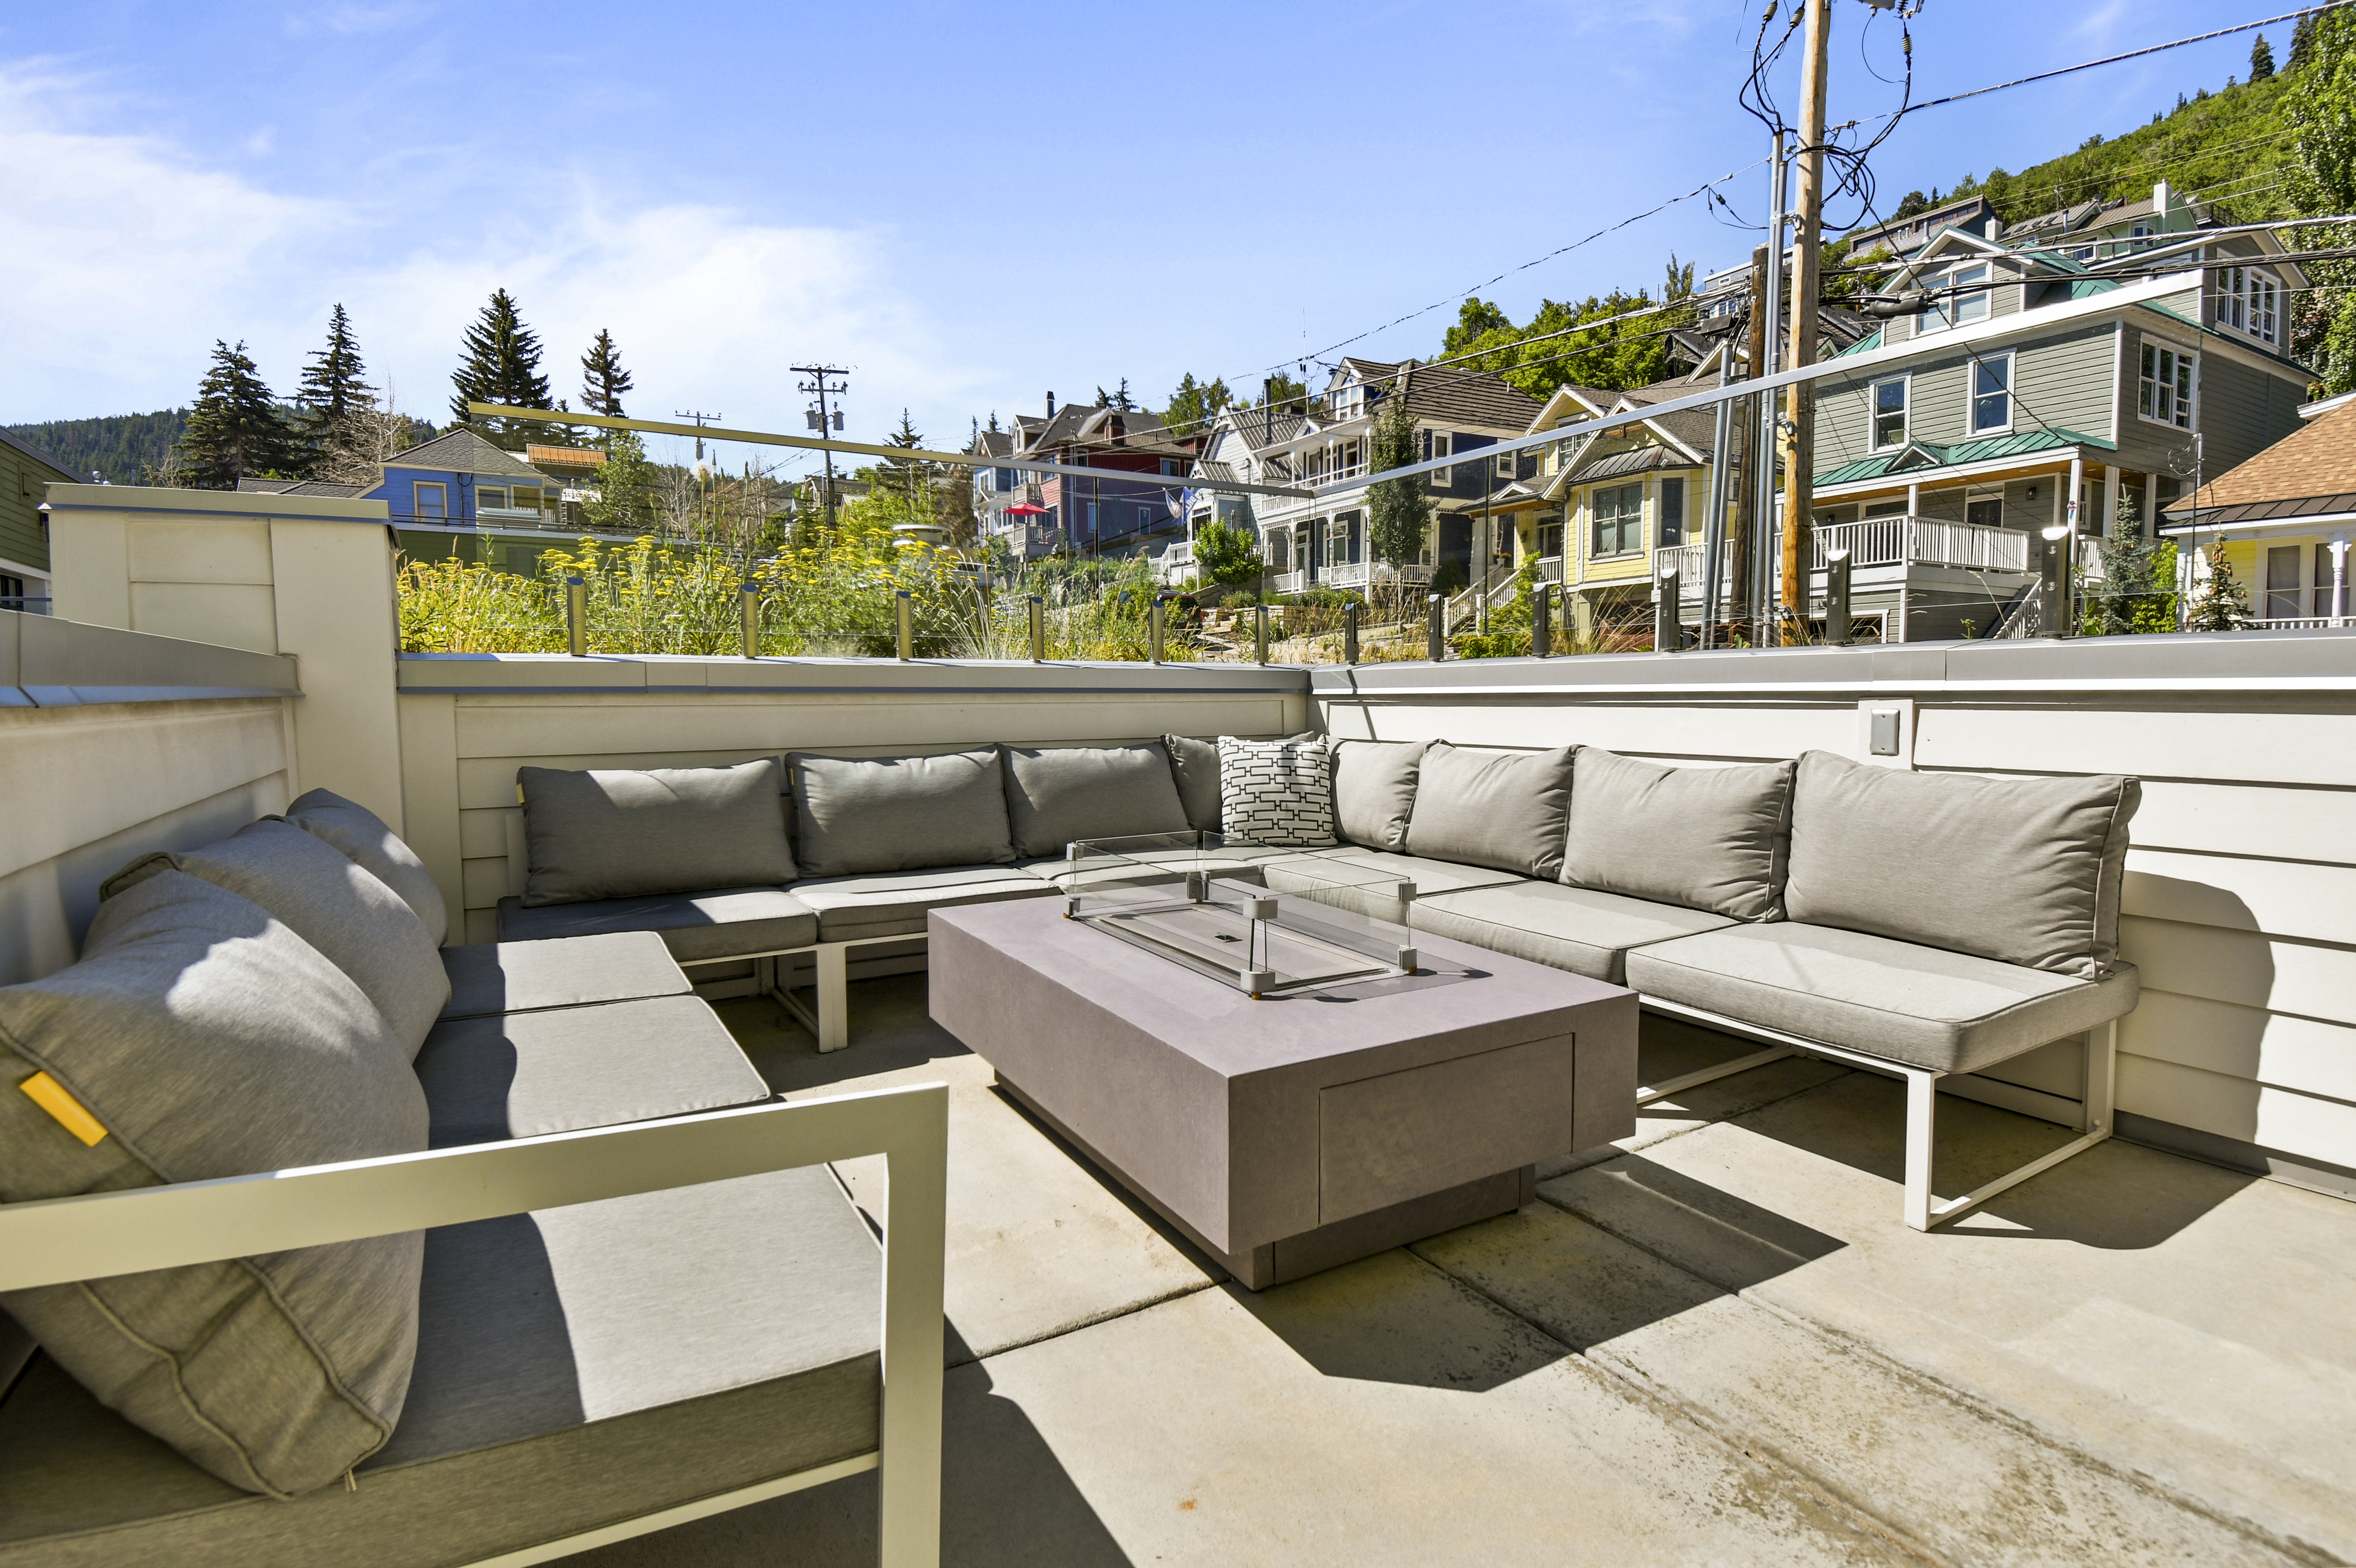 Comfortable seating surrounding your private fire pit on the balcony.